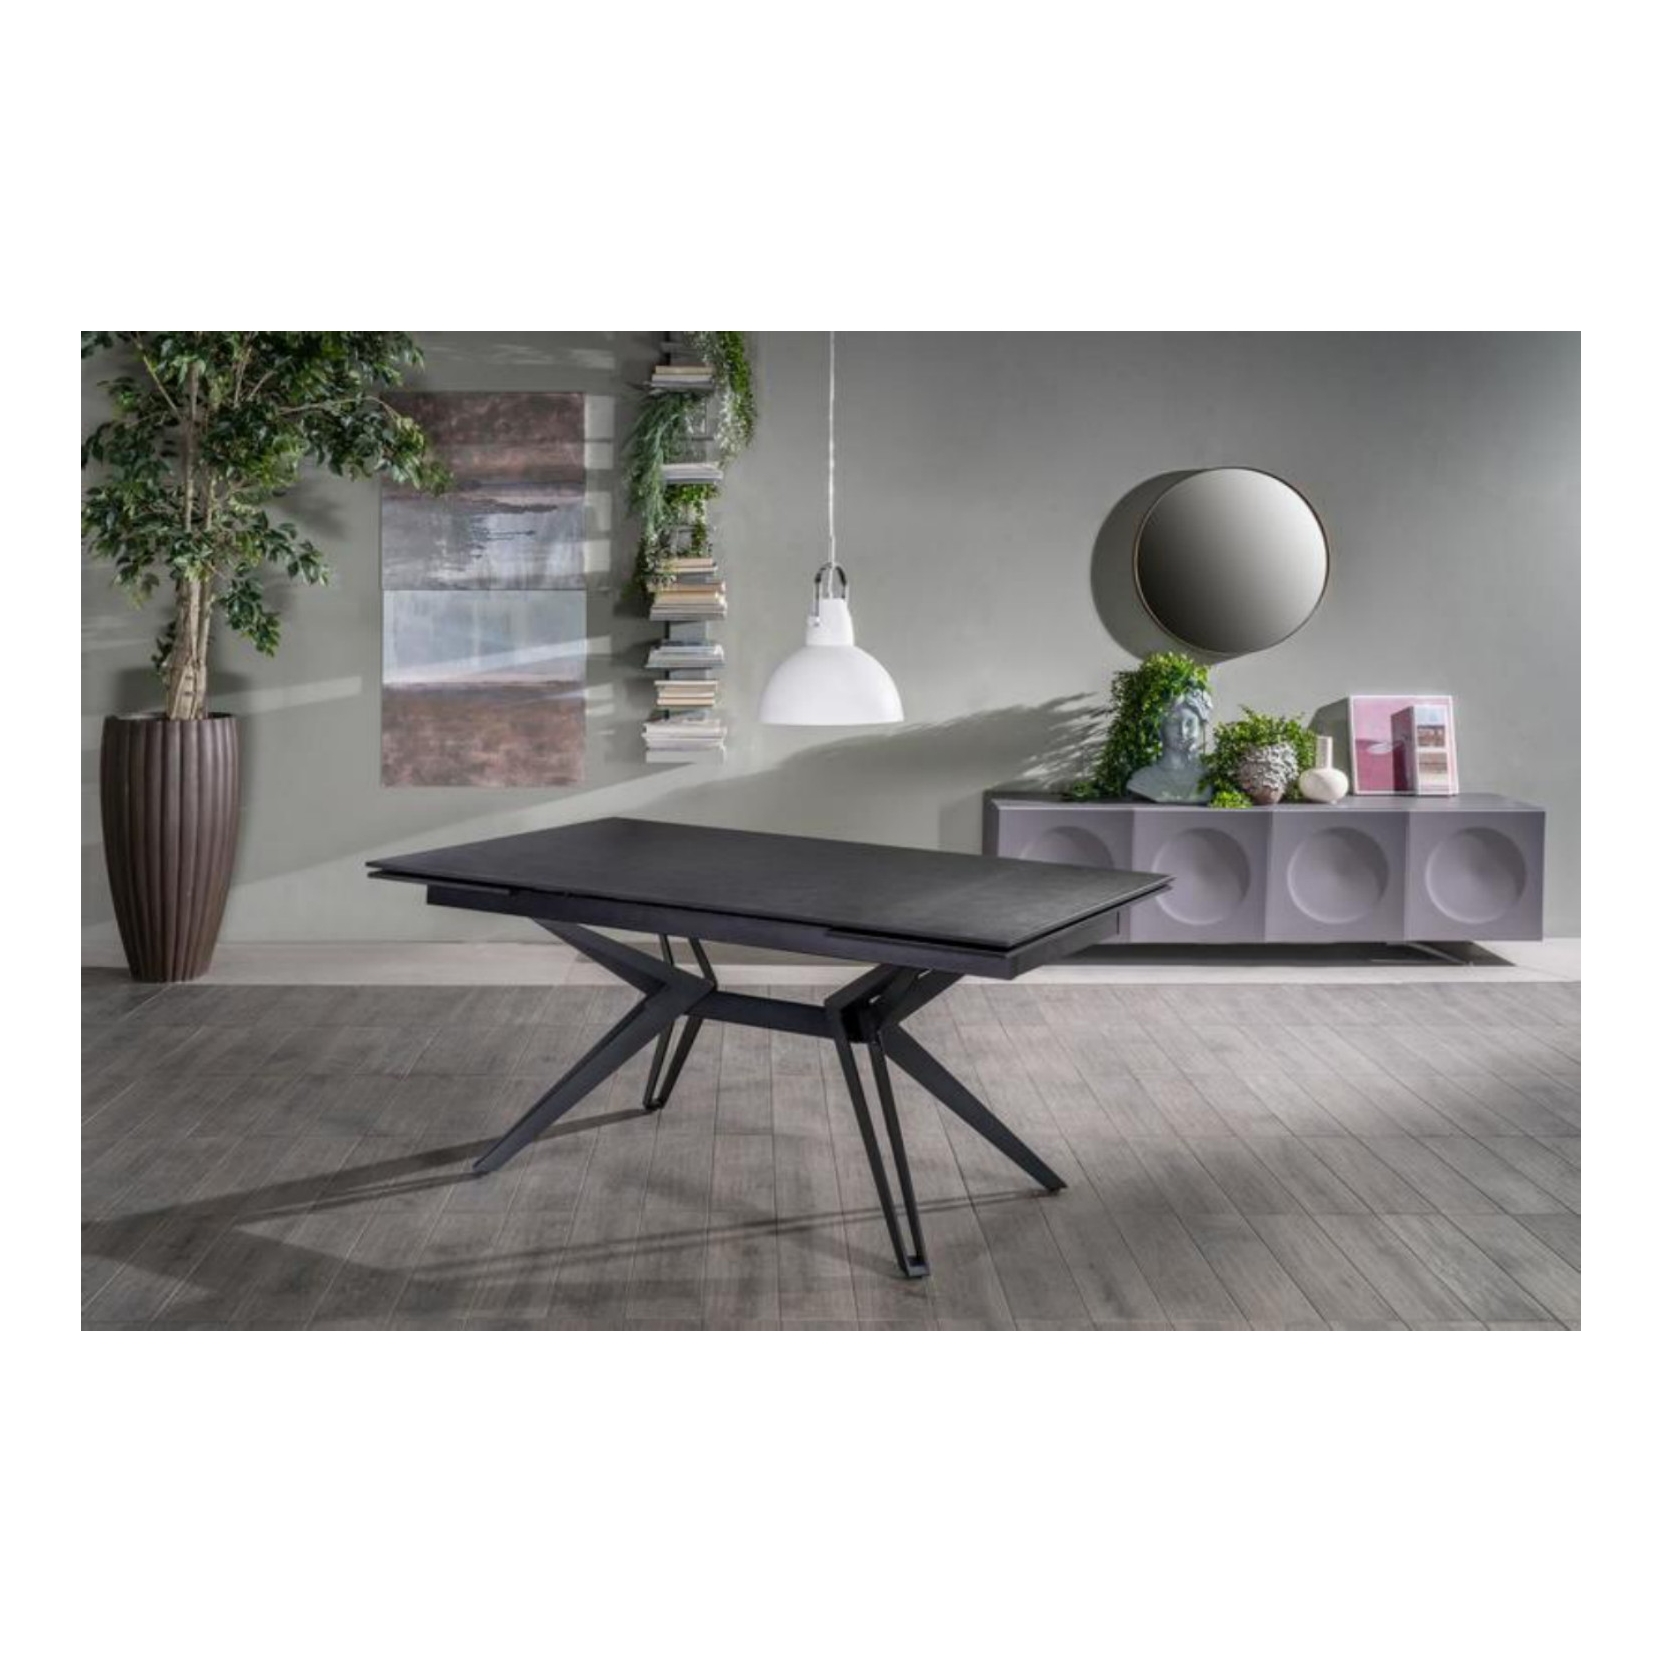 Stones - Match 3 OM/437/GV Extendable Table